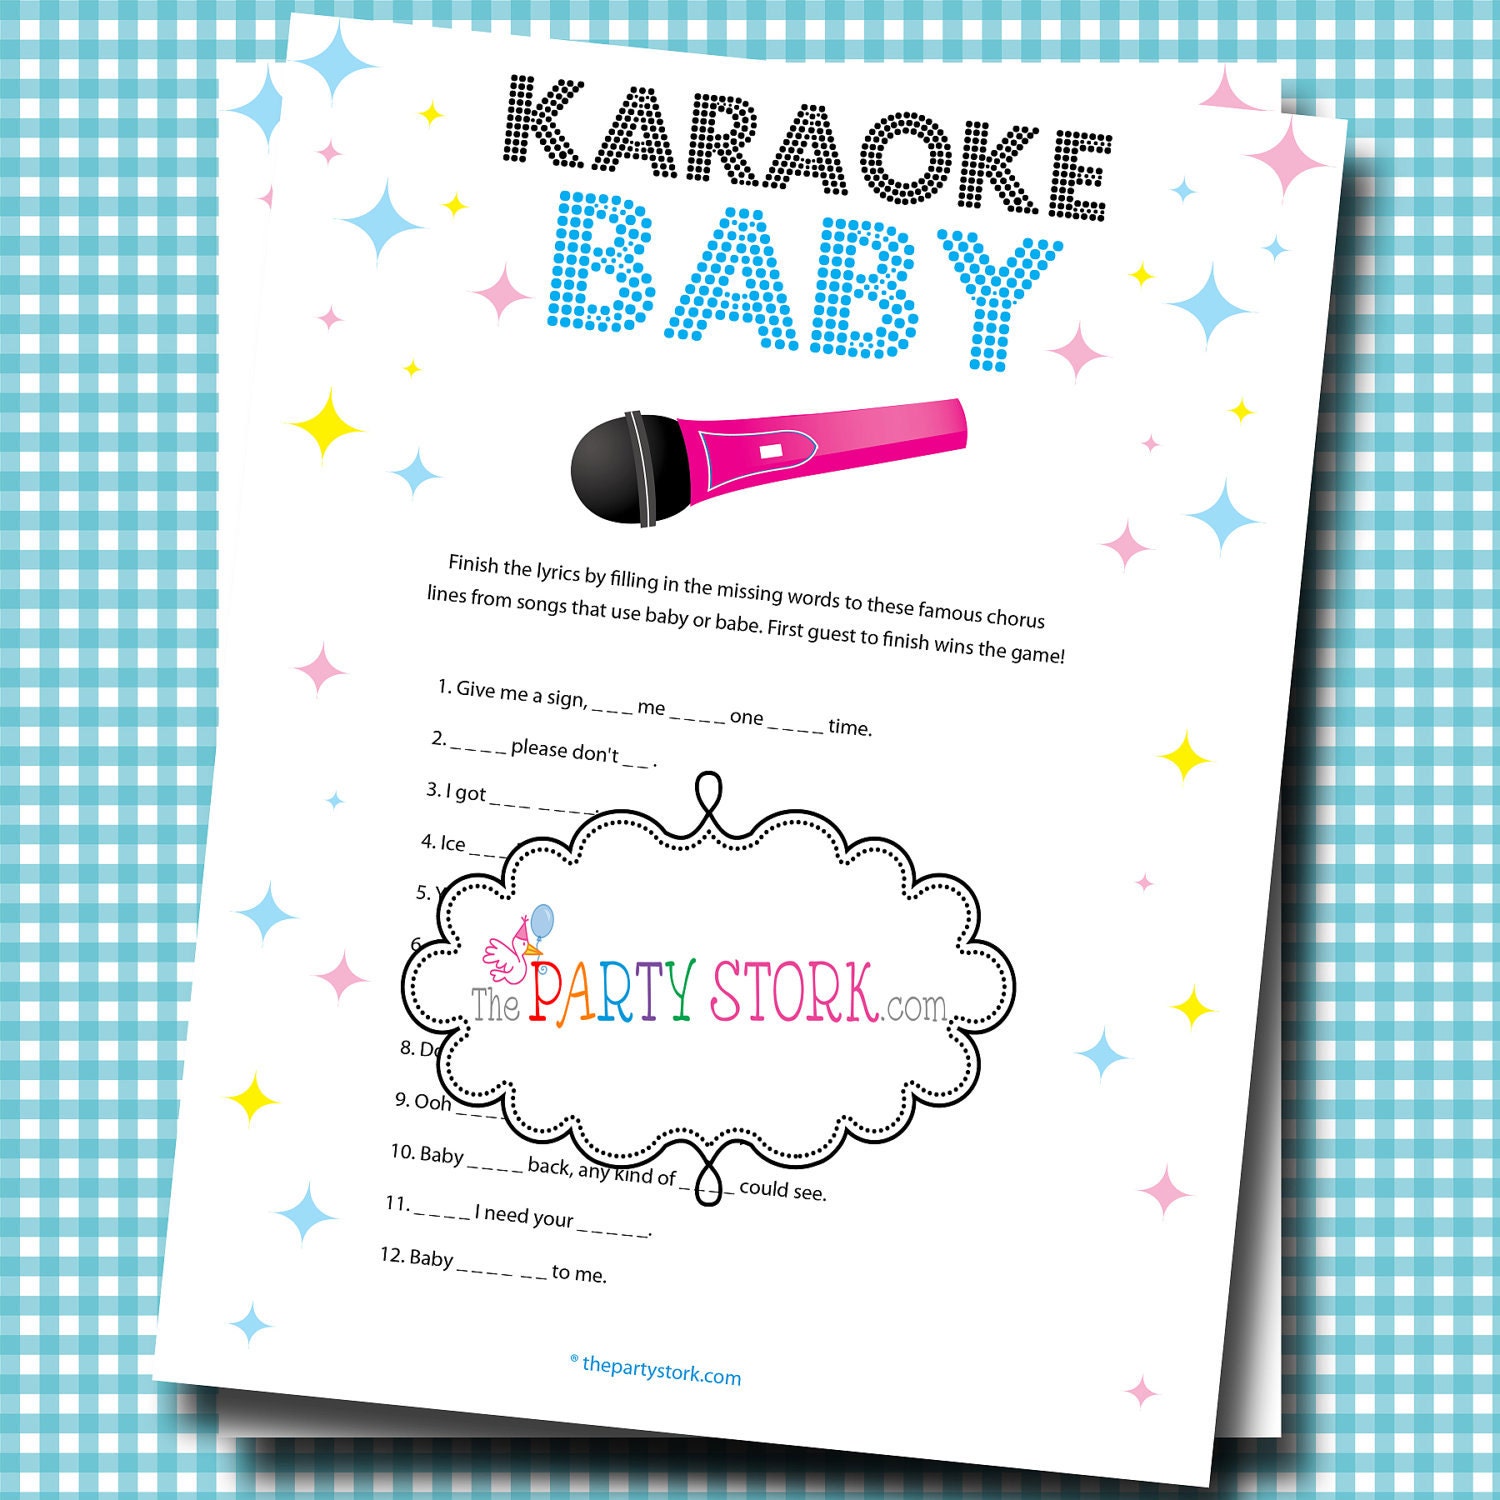 juegos baby shower para imprimir Free Printable Baby Shower Games for Boys | 1500 x 1500